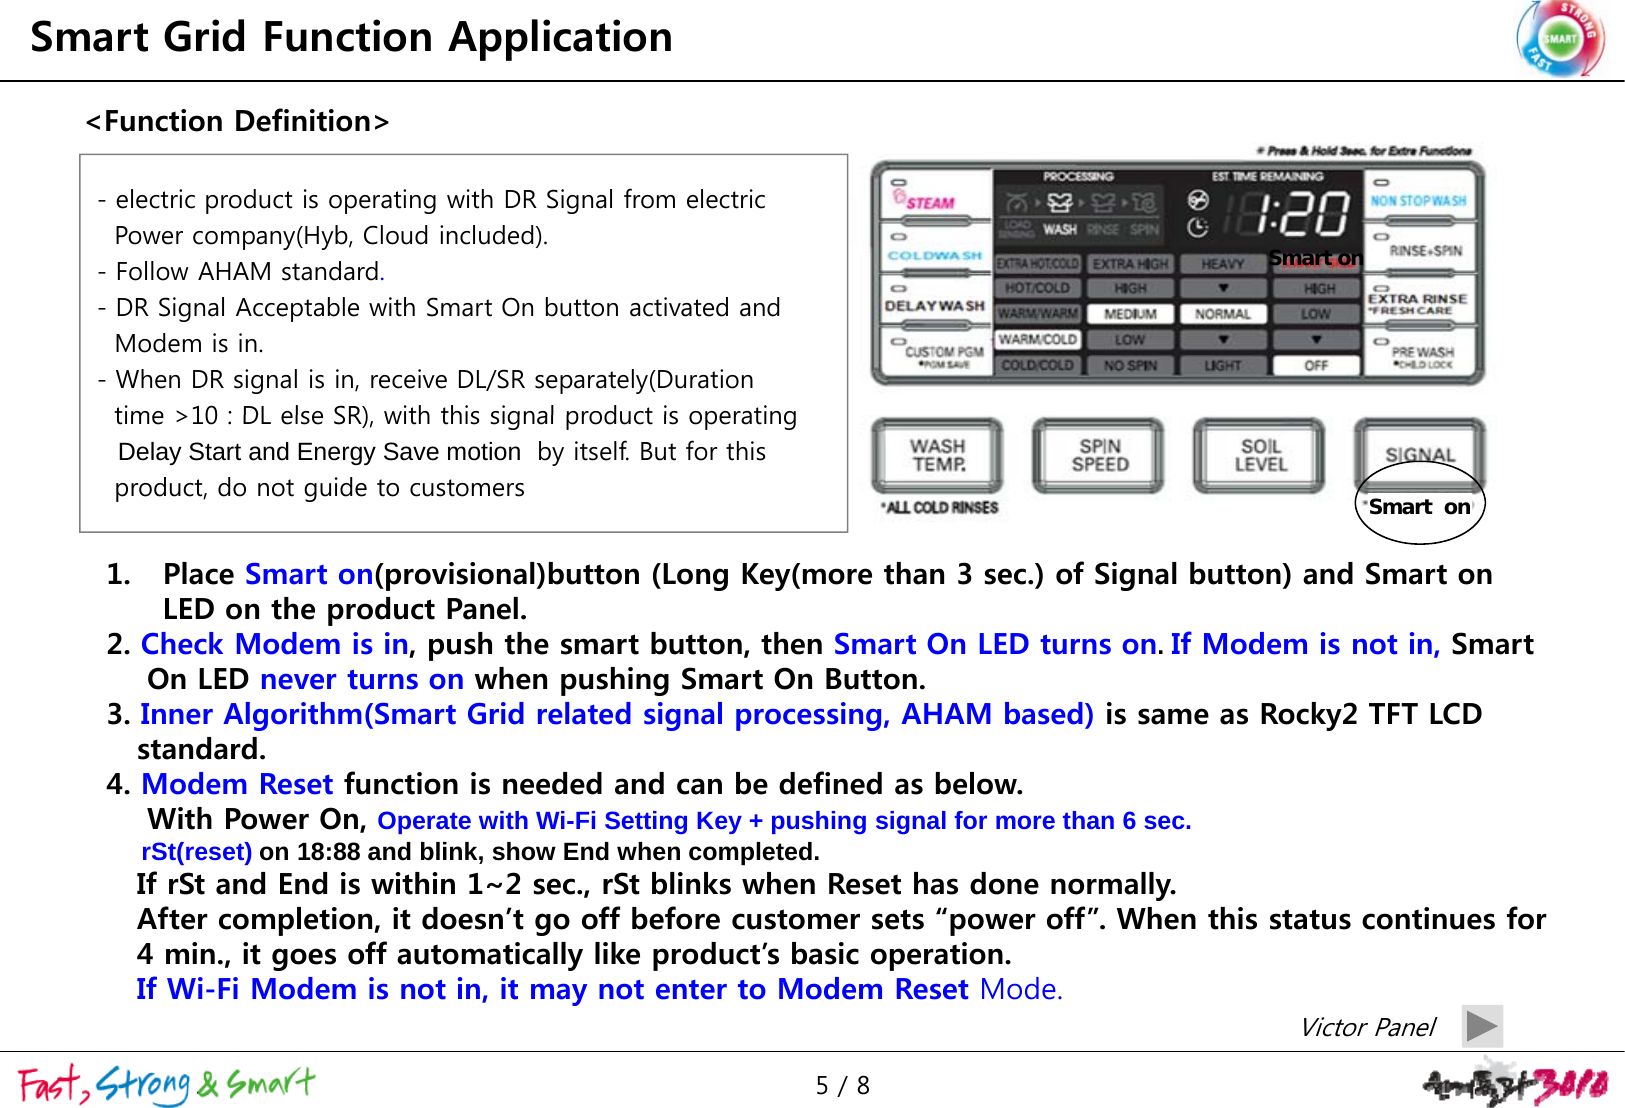 Smart Grid Function Application&lt;Function Definition&gt;Smart on- electric product is operating with DR Signal from electricPower company(Hyb, Cloud included).-Follow AHAM standardFollow AHAM standard.- DR Signal Acceptable with Smart On button activated and Modem is in.- When DR signal is in, receive DL/SR separately(Duration time &gt;10 : DL else SR) with this signal product is operatingSmart  ontime &gt;10 : DL else SR), with this signal product is operatingDelay Start and Energy Save motion  by itself. But for this product, do not guide to customers1. Place Smart on(provisional)button (Long Key(more than 3 sec.) of Signal button) and Smart on LED on the product Panel.2. Check Modem is in, push the smart button, then Smart On LED turns on.If Modem is not in, Smart On LED never turns on when pushing Smart On Button.pg3. Inner Algorithm(Smart Grid related signal processing, AHAM based) is same as Rocky2 TFT LCD standard.    4. Modem Reset function is needed and can be defined as below.With Power On, Operate with Wi-Fi Setting Key + pushing signal for more than 6 sec.rSt(reset) on 18:88 and blink, show End when completed.If rSt and End is within 1~2 sec., rSt blinks when Reset has done normally.After completion, it doesn’t go off before customer sets “power off”. When this status continues for 4 min., it goes off automatically like product’s basic operation.fIf Wi-Fi Modem is not in, it may not enter to Modem Reset Mode.Victor Panel5 / 8